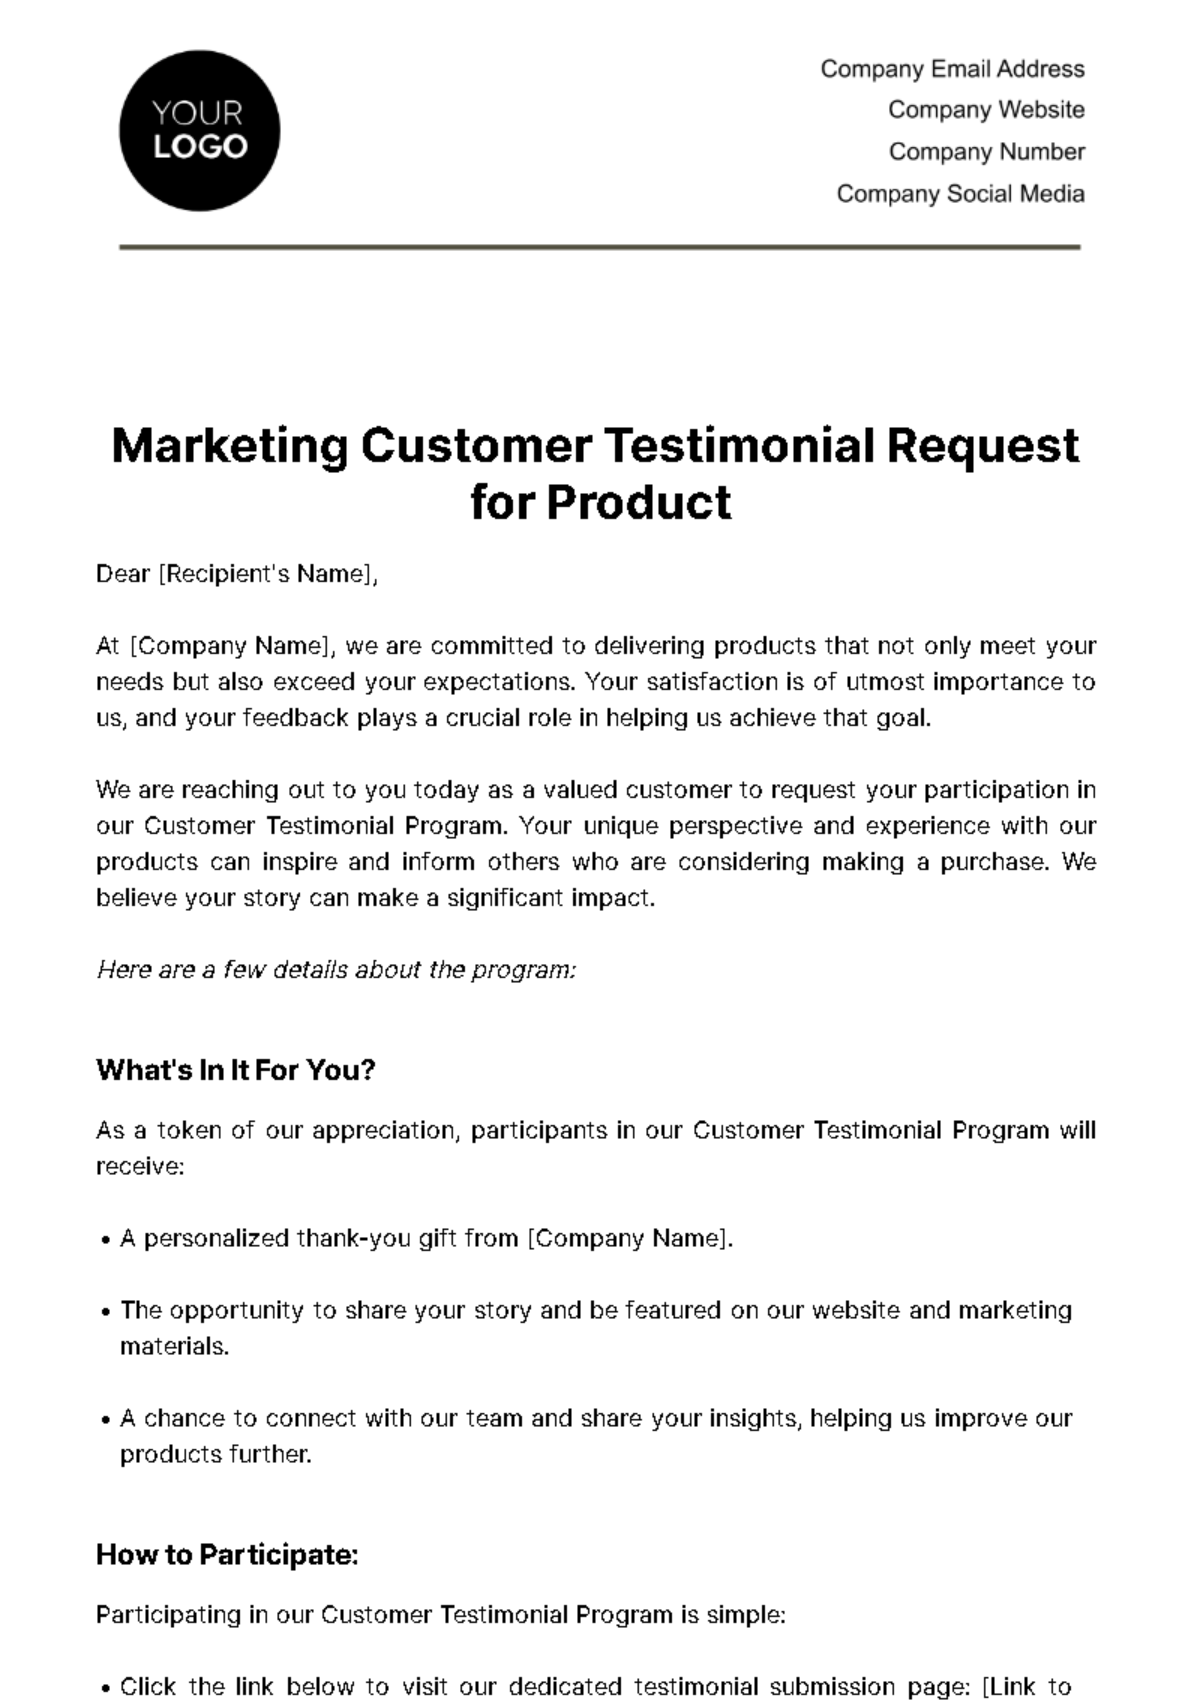 Free Marketing Customer Testimonial Request for Product Template